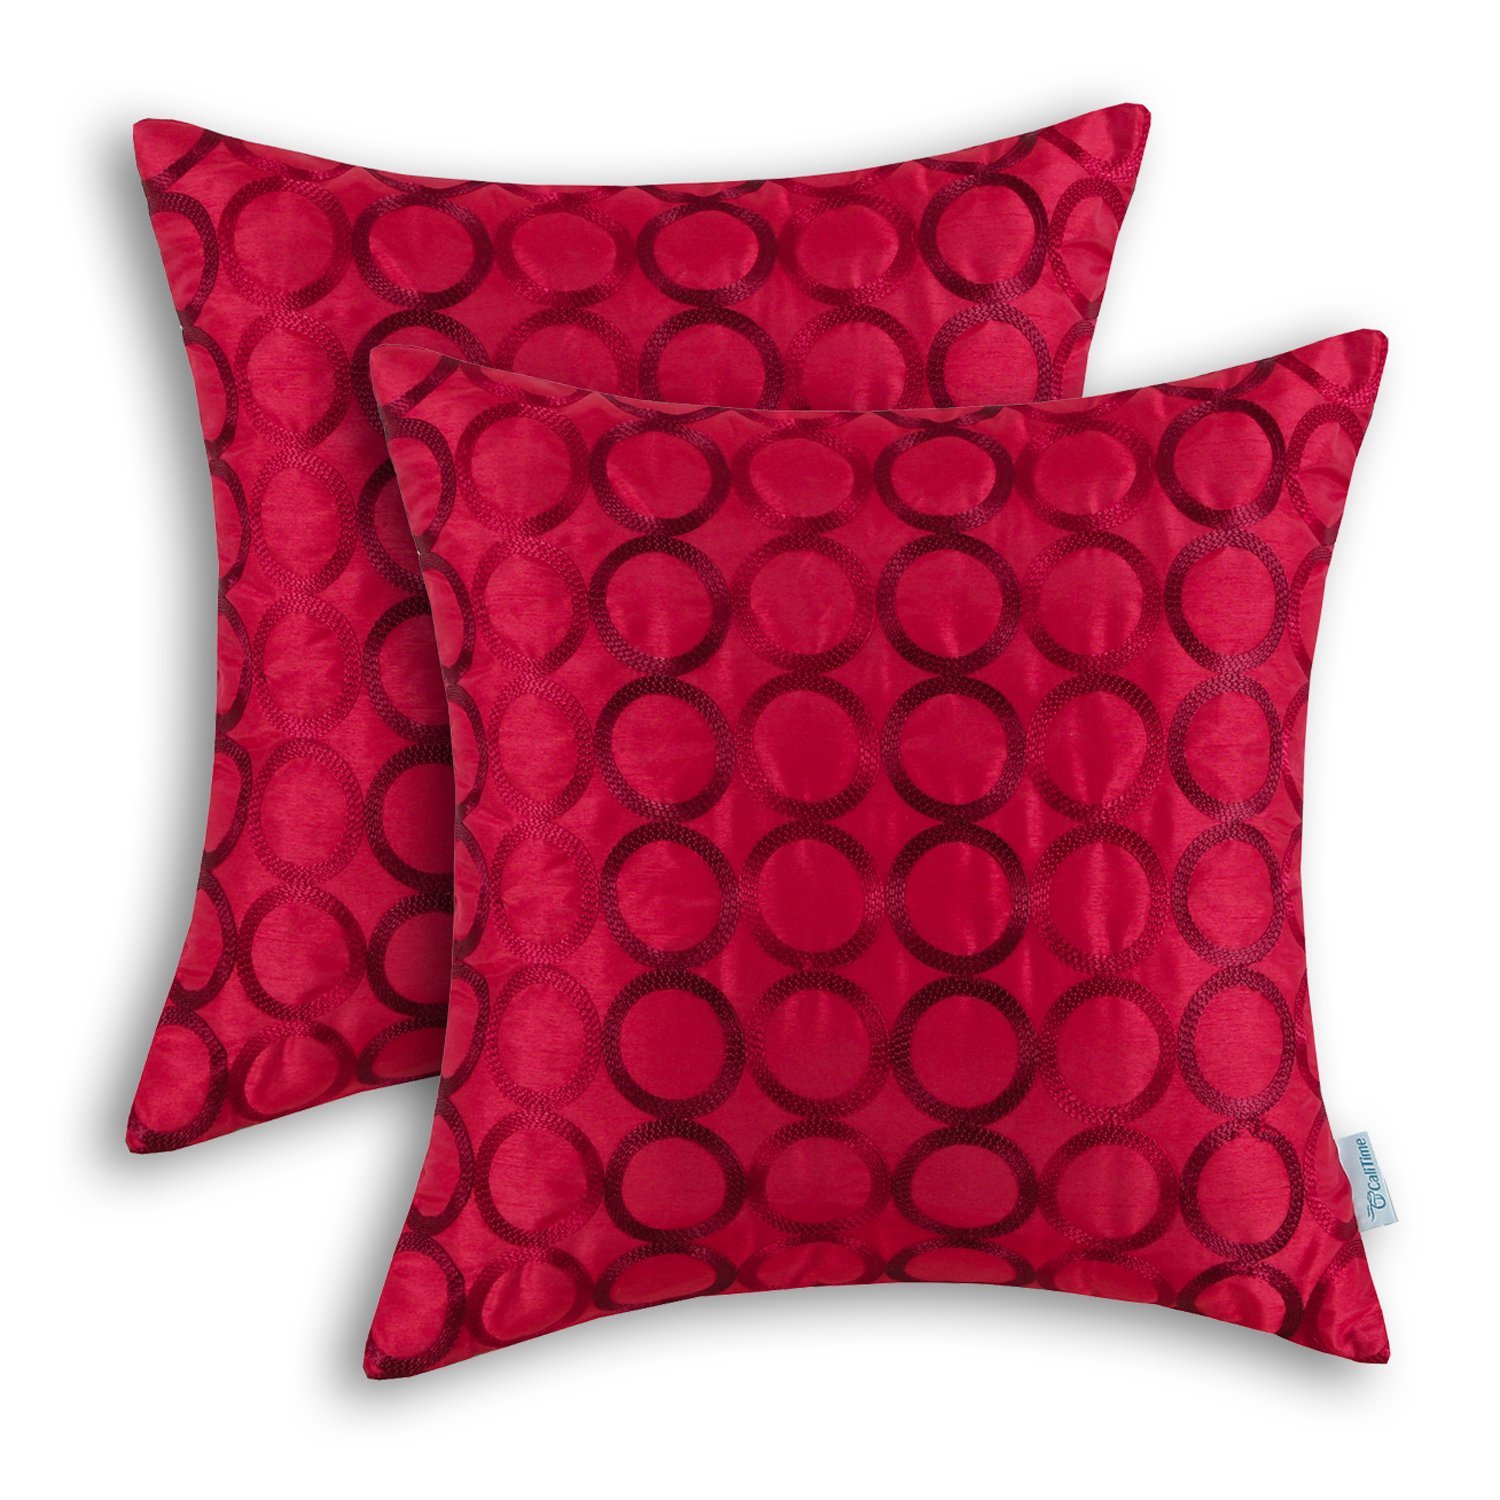 Romantic Bedroom Pillow To Enhance Feng Shui of Your Bedroom - Click Here To Preview